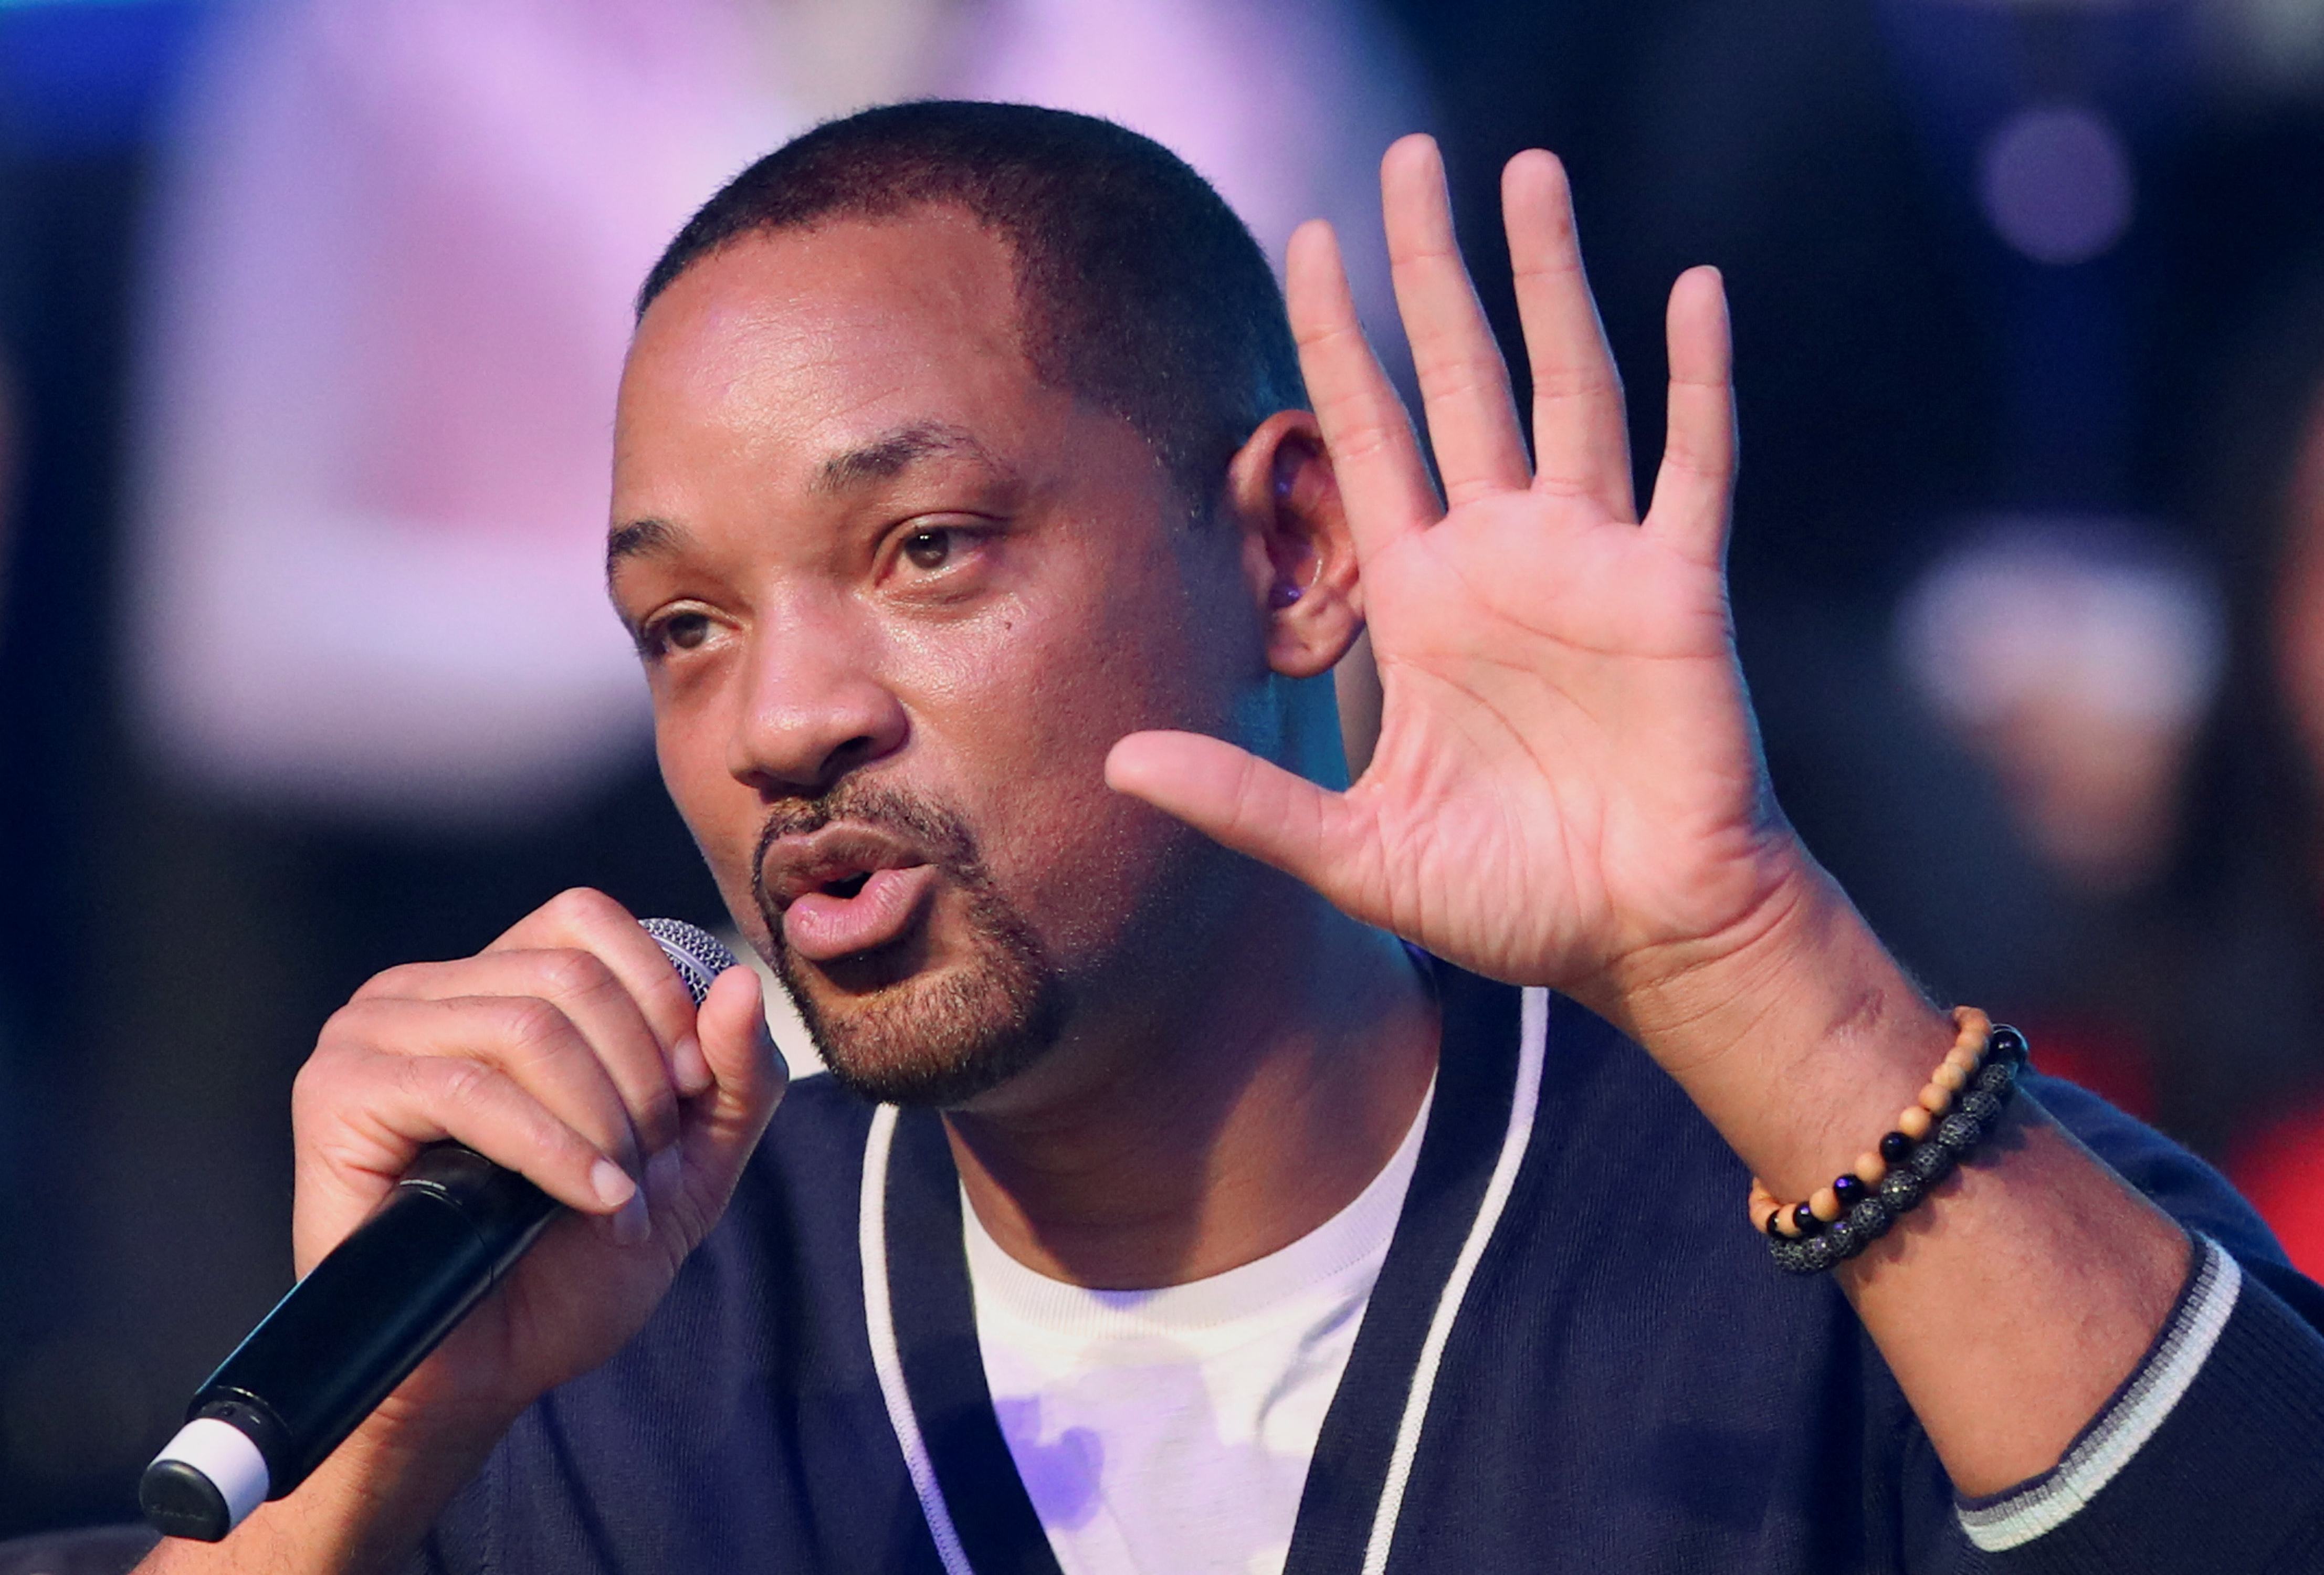 Rehashing Some Previous Stories & Will Smith